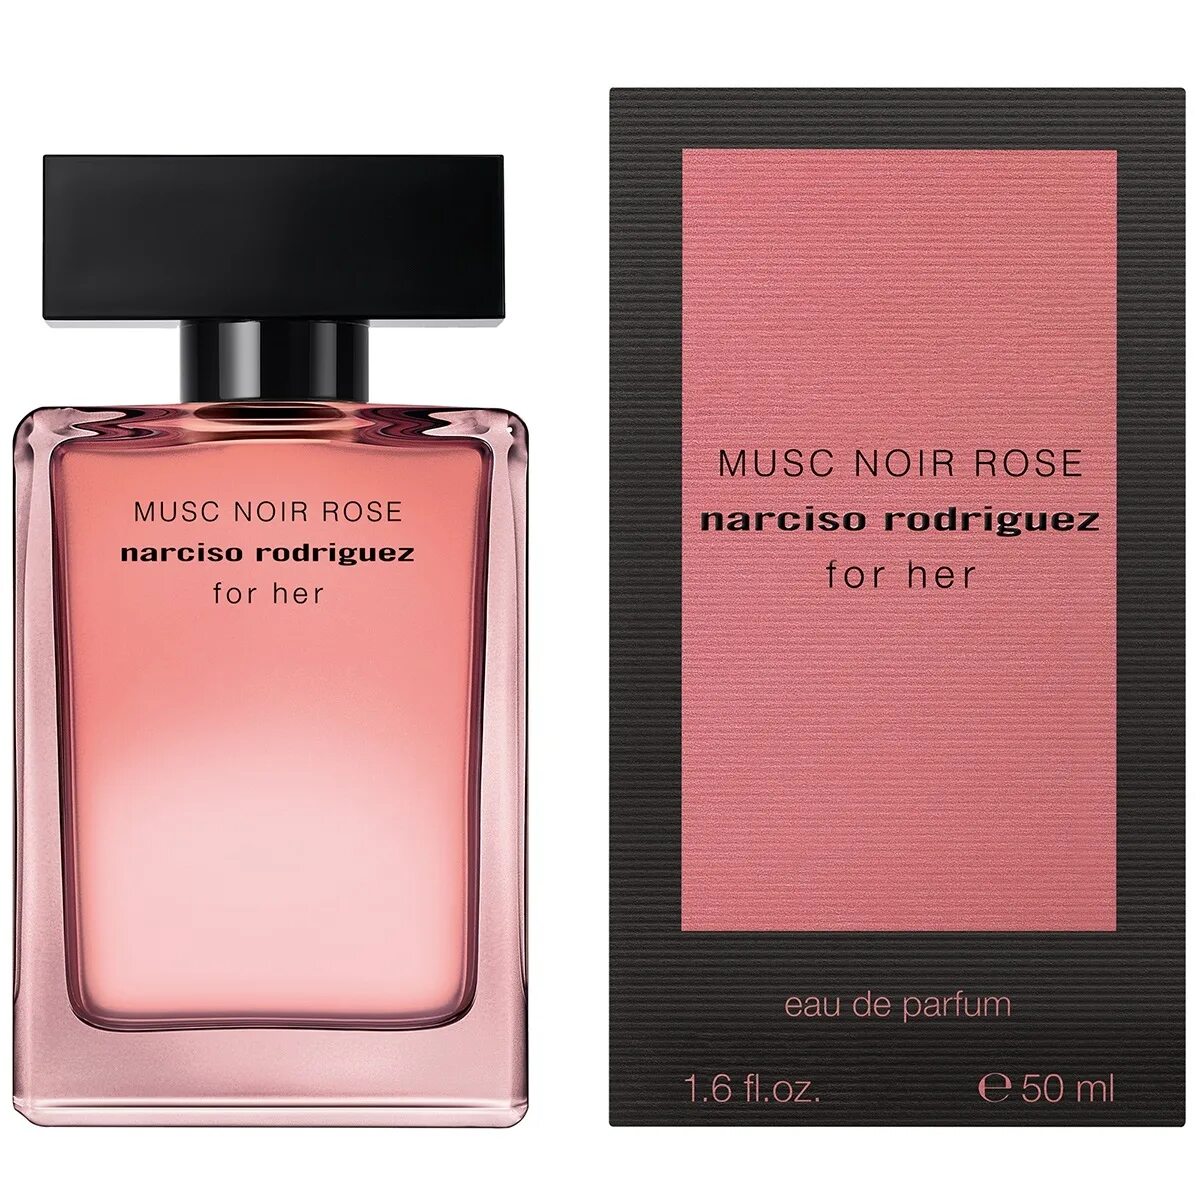 Родригес духи отзывы. Narciso Rodriguez Musc Noir Rose for her. Narciso Rodriguez for her Eau de Parfum. Narciso Rodriguez for her Musc Noir EDP 30ml. Narciso Rodriguez Musk Noir Rose for her 30 мл.